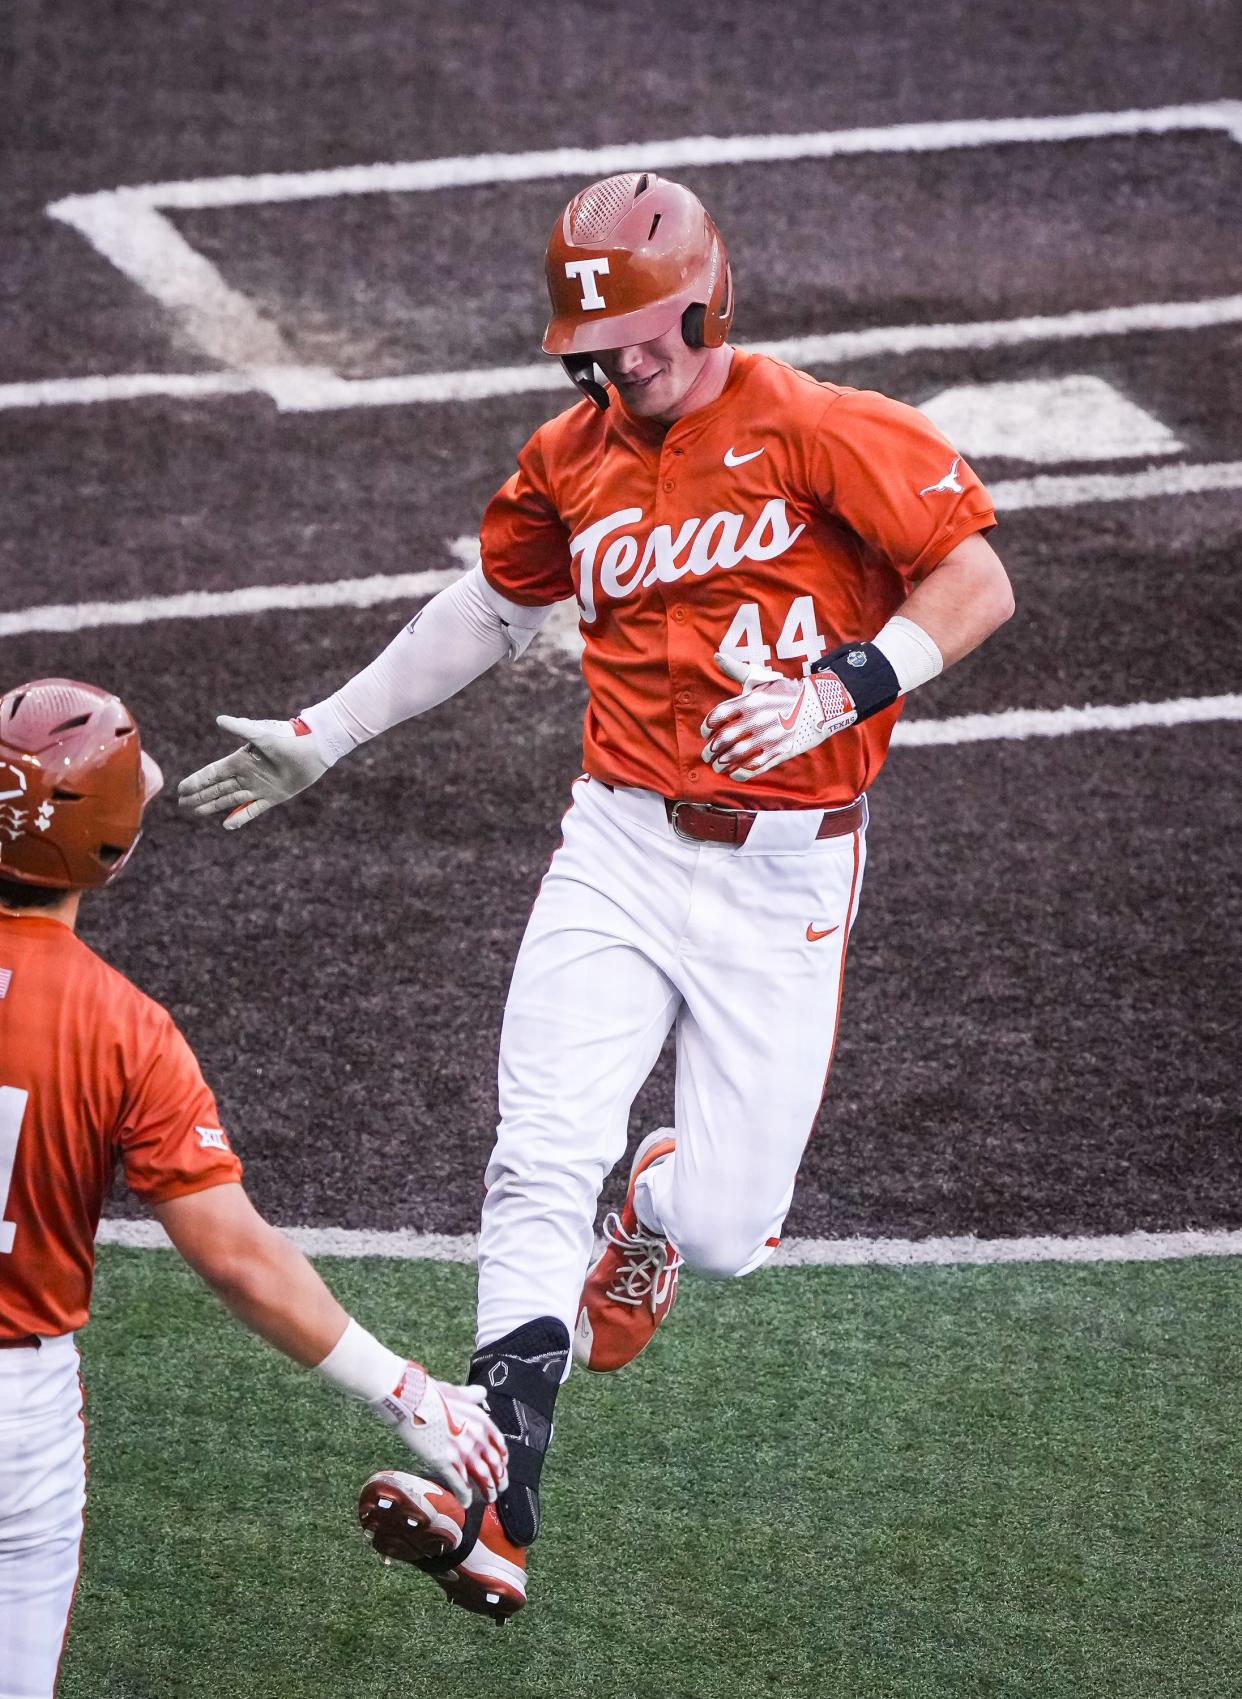 Texas outfielder Max Belyeu is tied with Jalin Flores with 16 home runs to lead the team. Texas is averaging 2.07 home runs per game this season, a better clip than the 1.86 average of the 2022 team, which hit a school-record 128 homers.